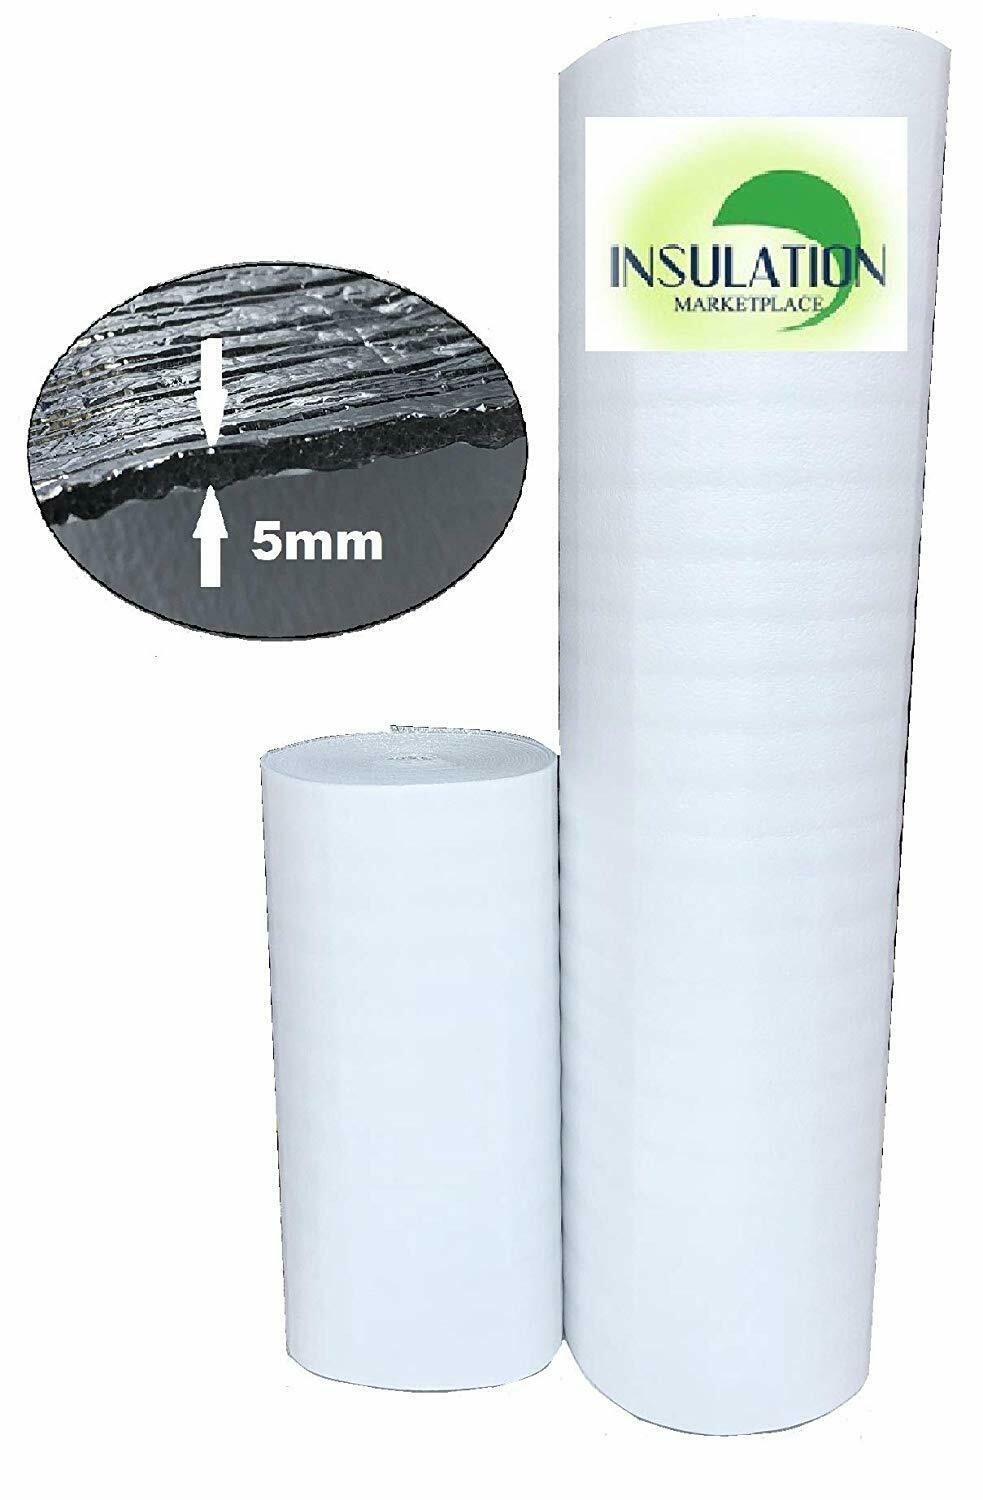 R8 48"x10' USEP Reflective Insulation Roll Foam Core Radiant Barrier 5MM AD5 